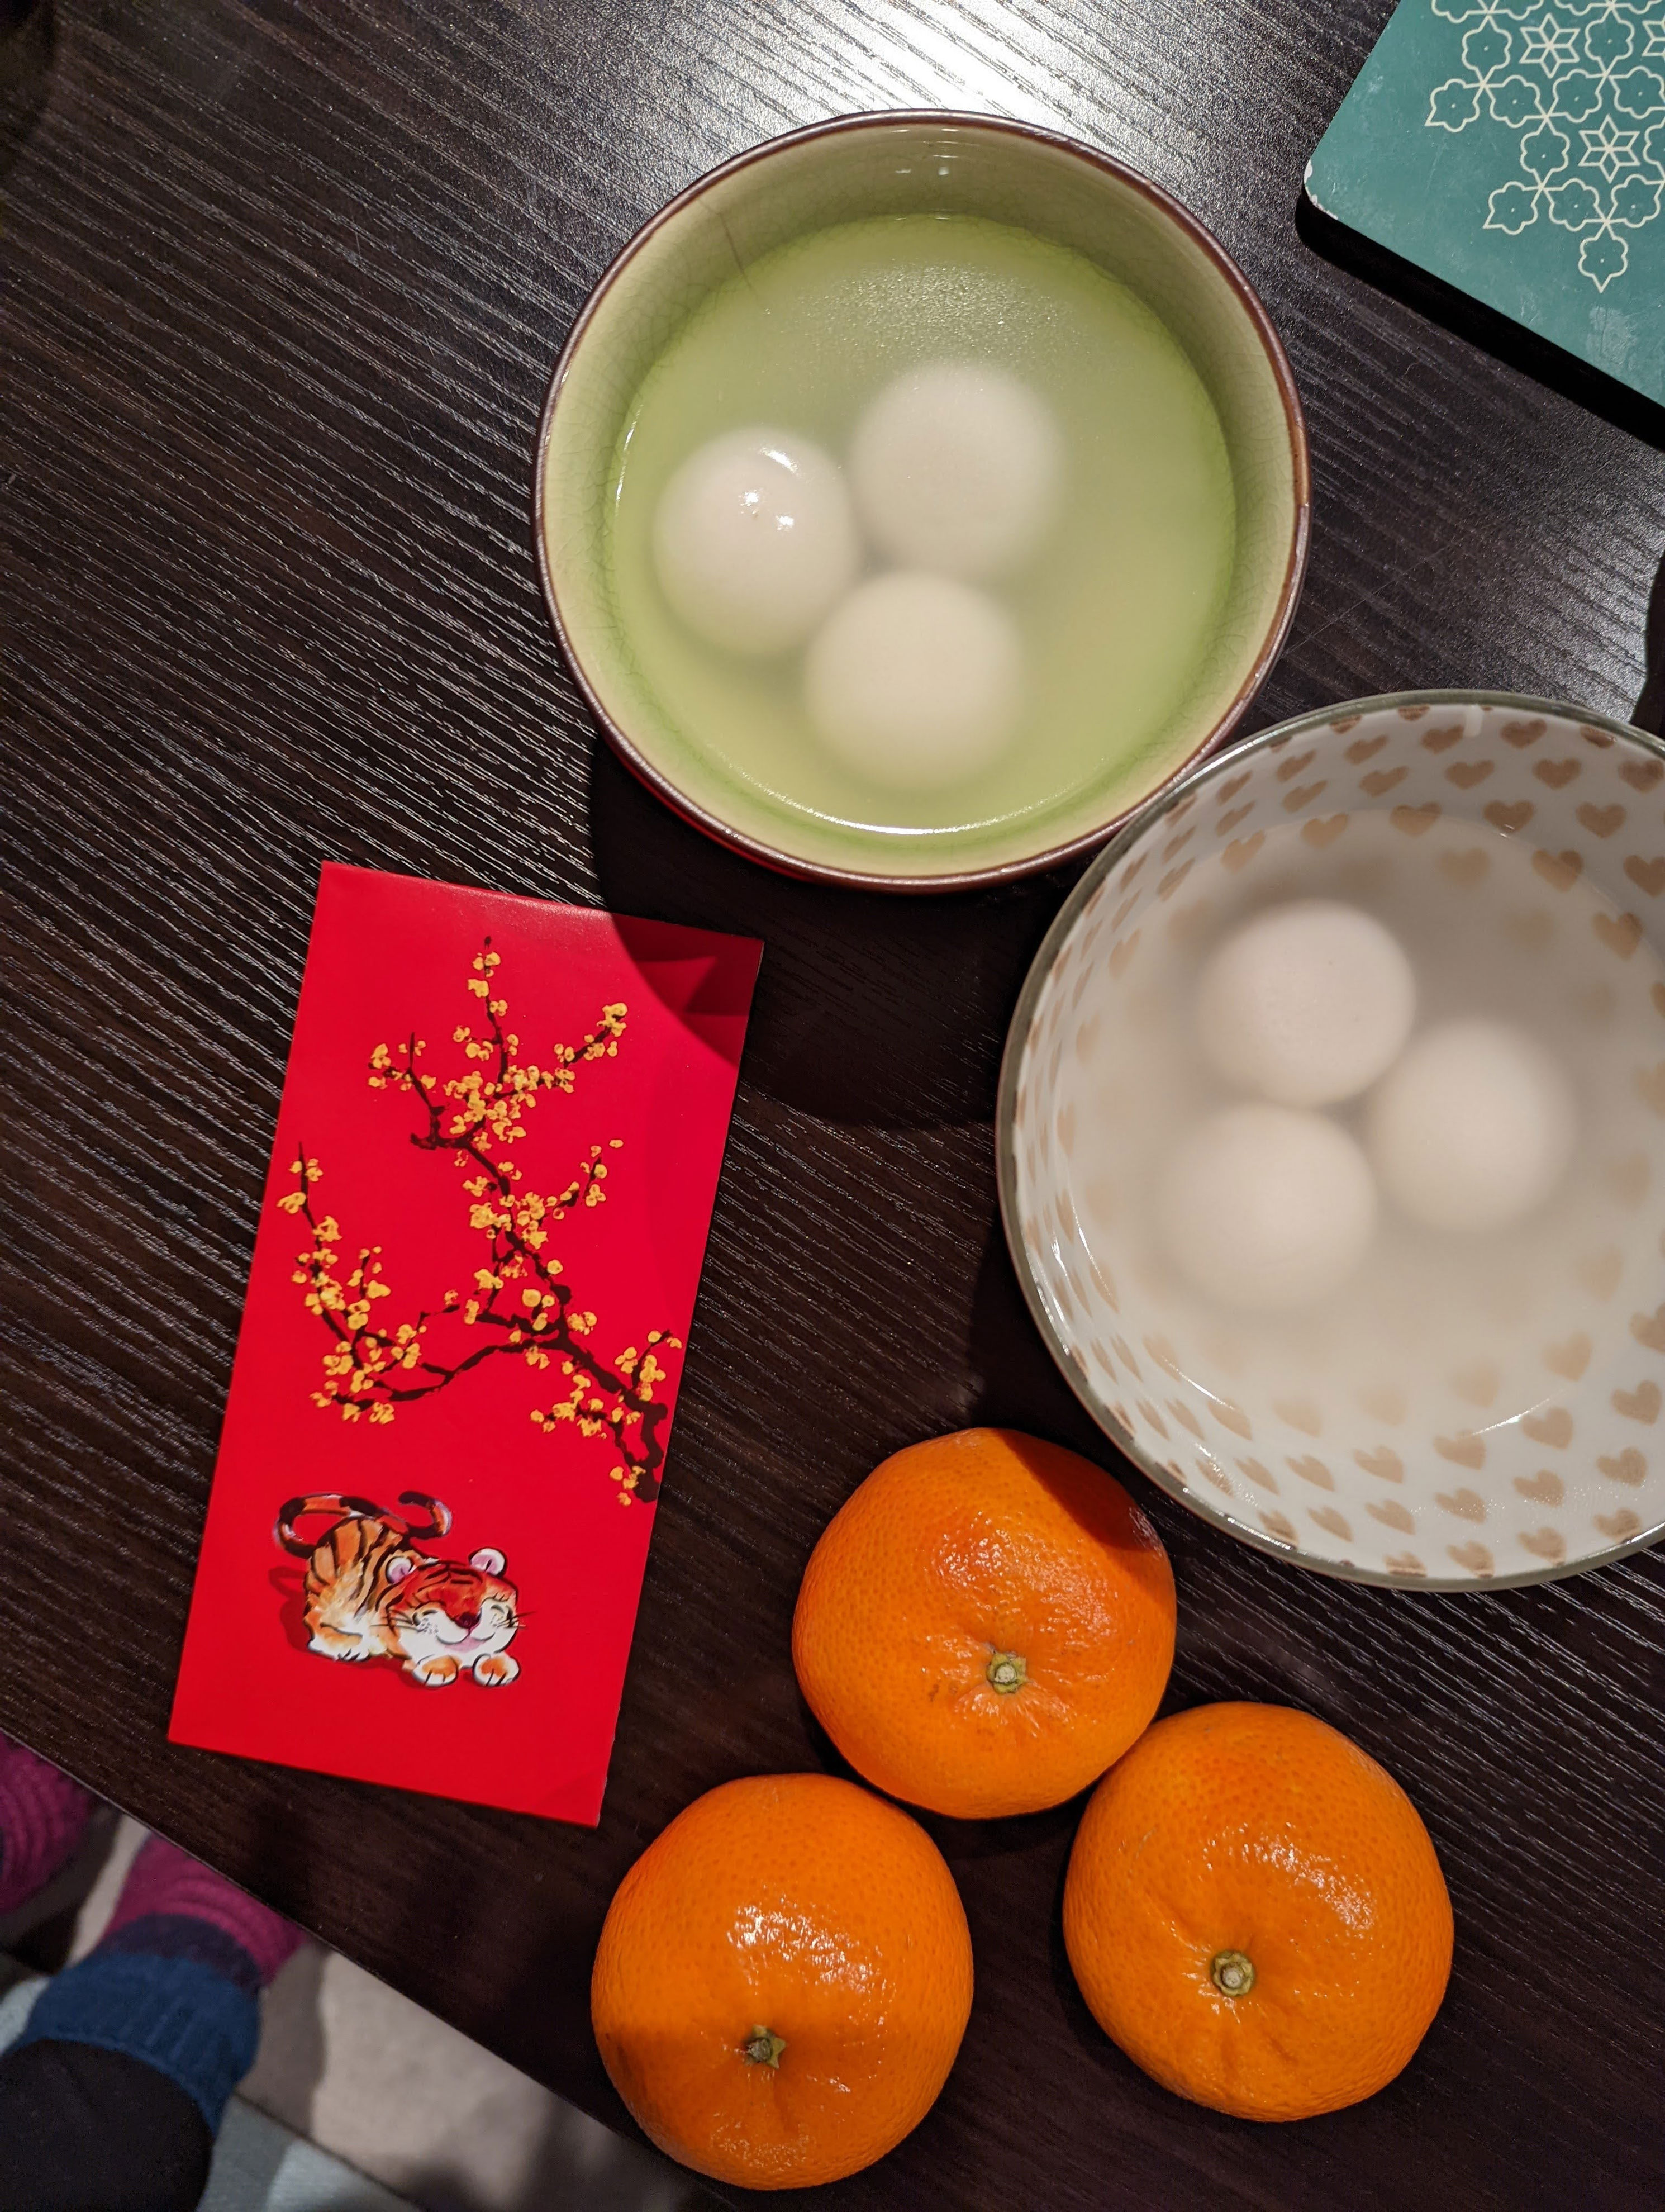 celebrating lunar new year traditions, from red envelopes to dumpling parties